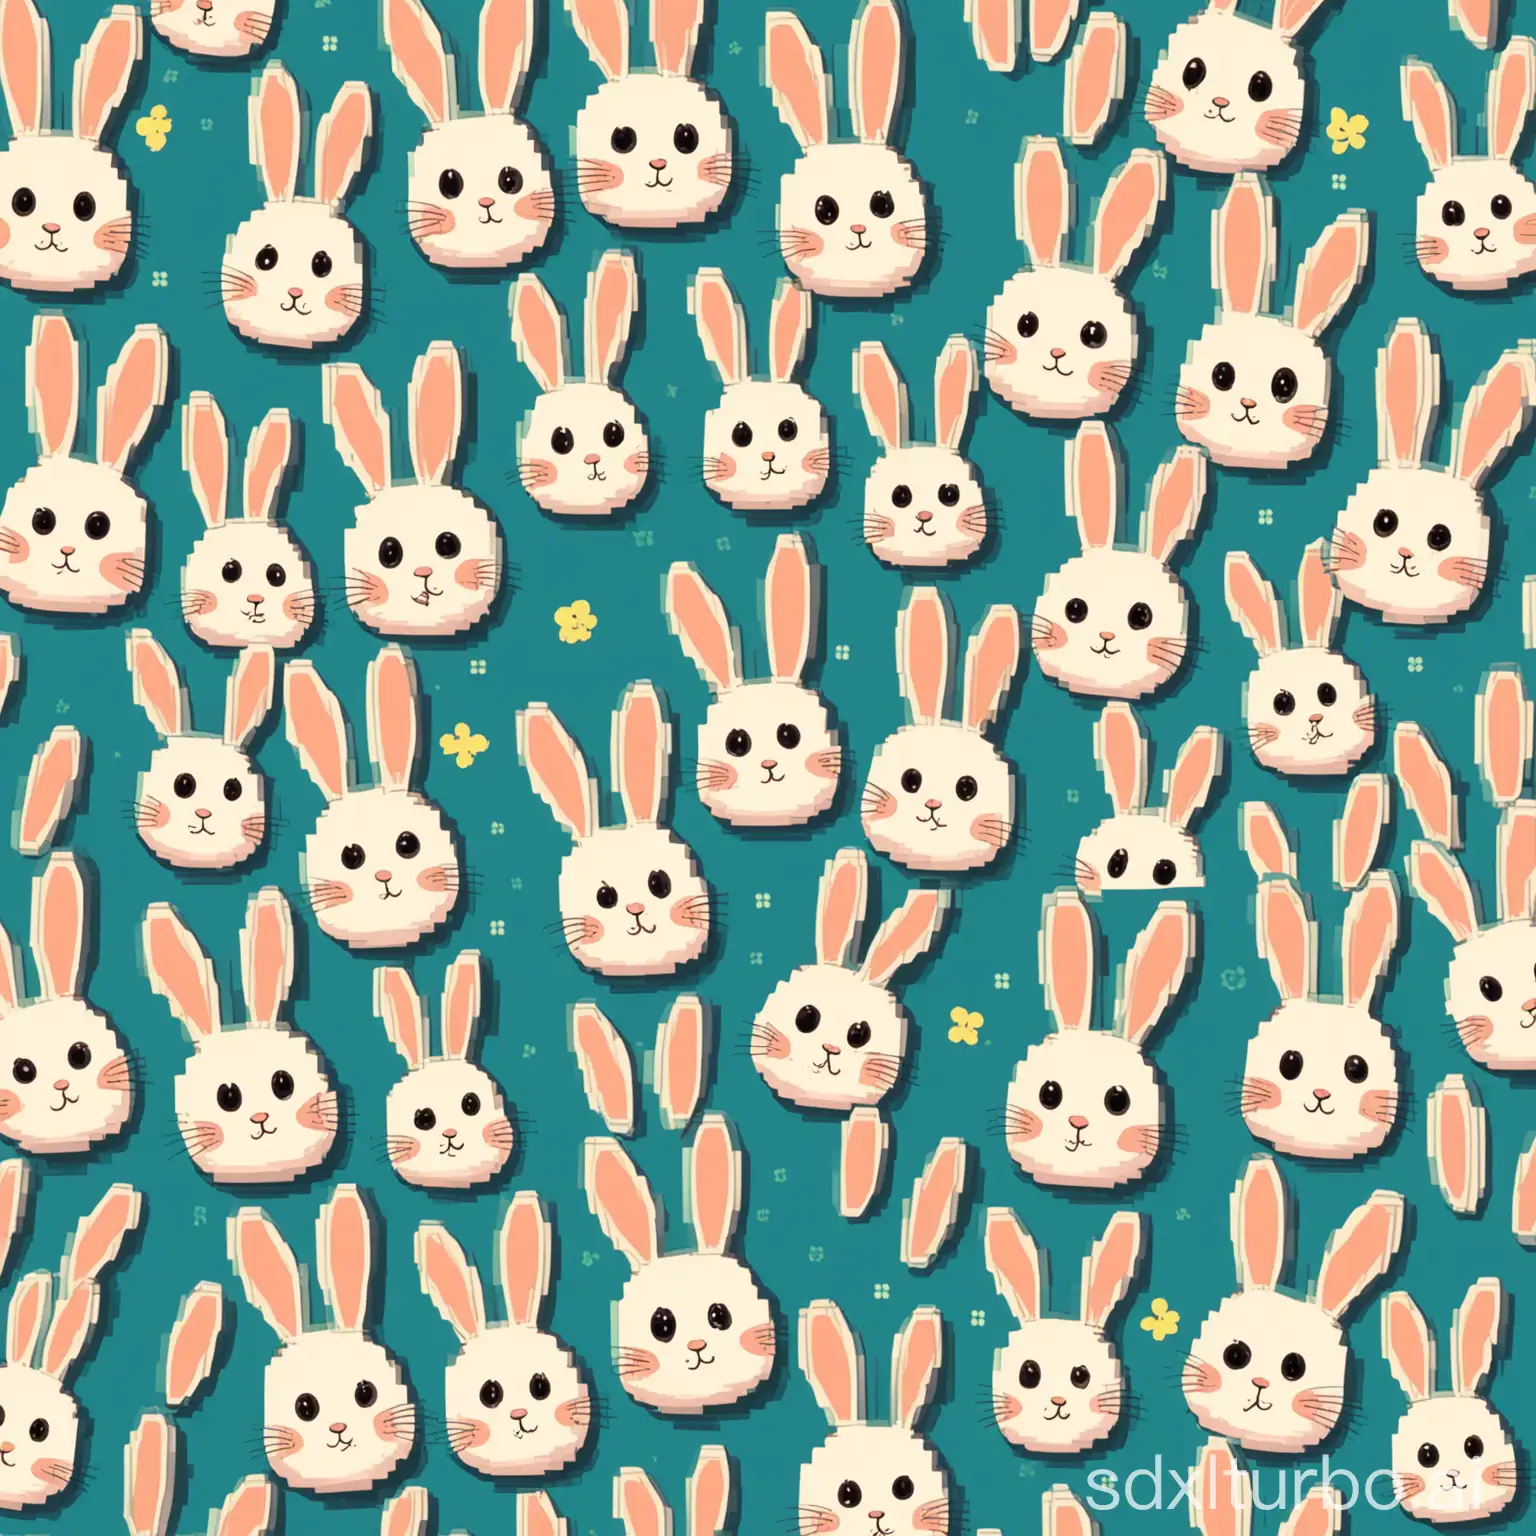 cartoon rabbit's background image, repeated tiling, simple